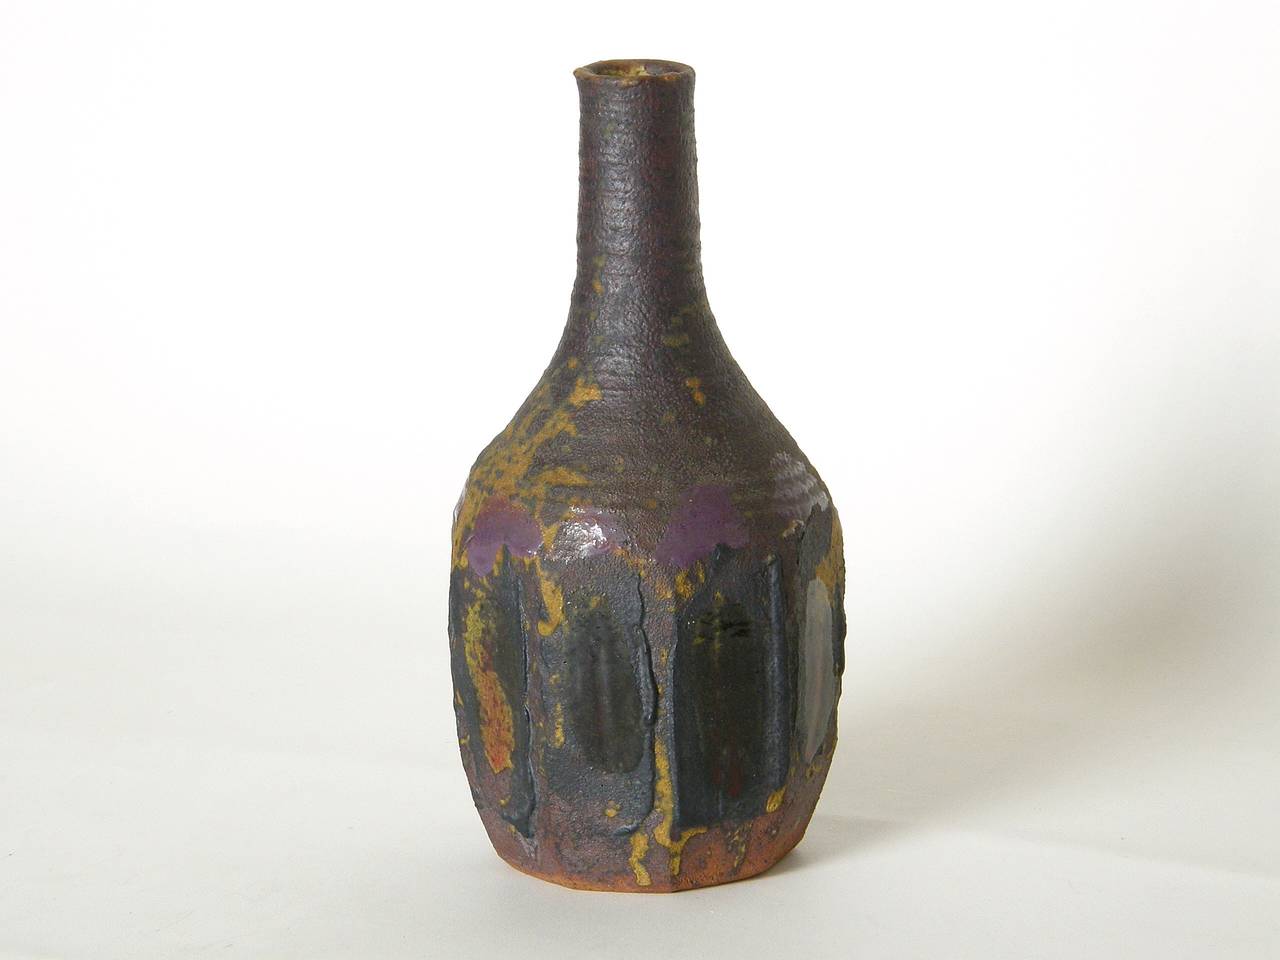 Ceramic vase by Robert Arneson, pioneering figure in the California Funk Art movement of the 1960s and 1970s.

Please contact us if you have any questions.